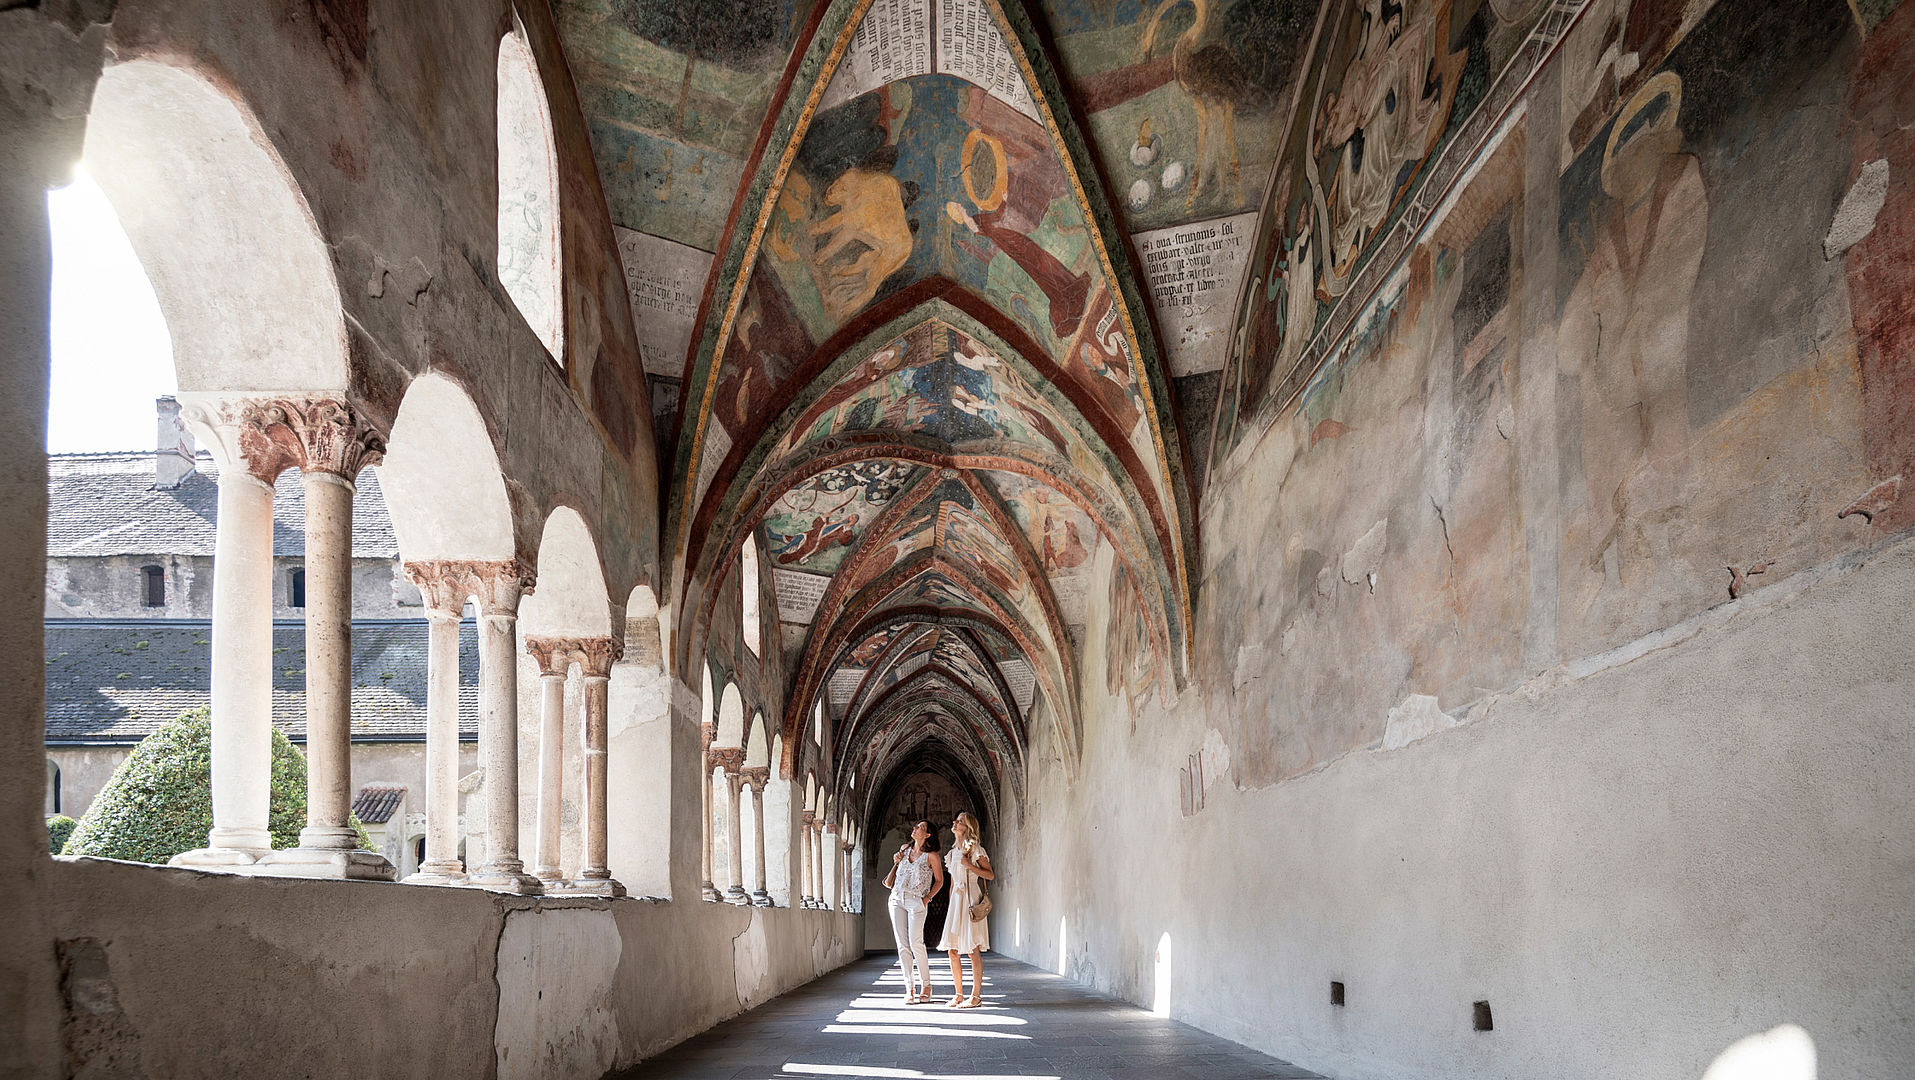 Passage in church with frescoes